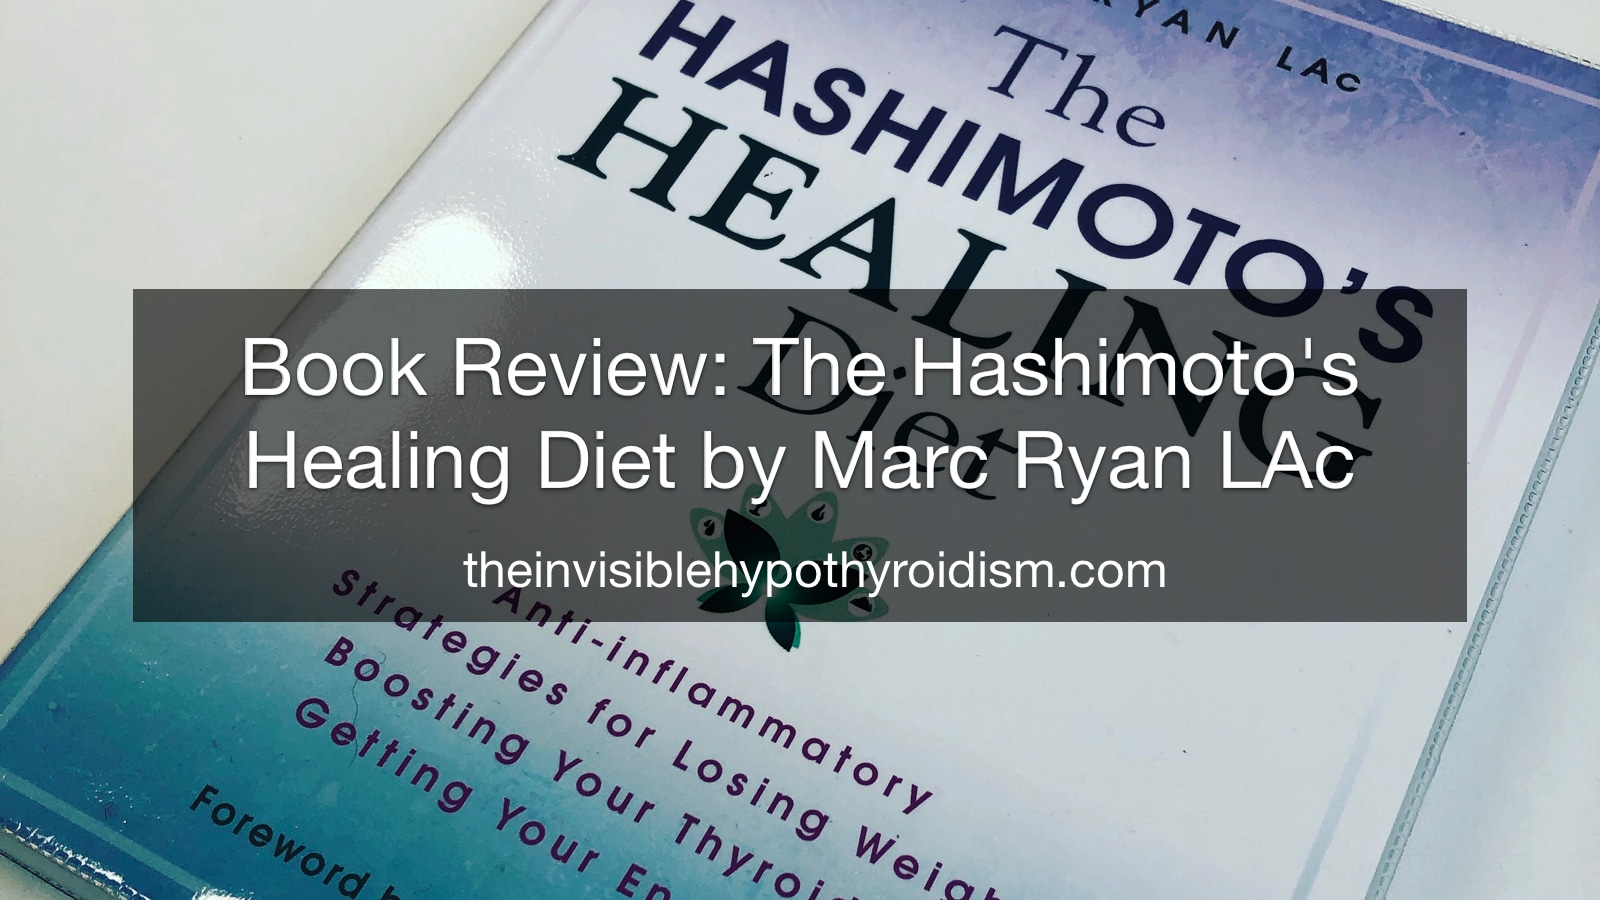 Book Review: The Hashimoto's Healing Diet by Marc Ryan LAc